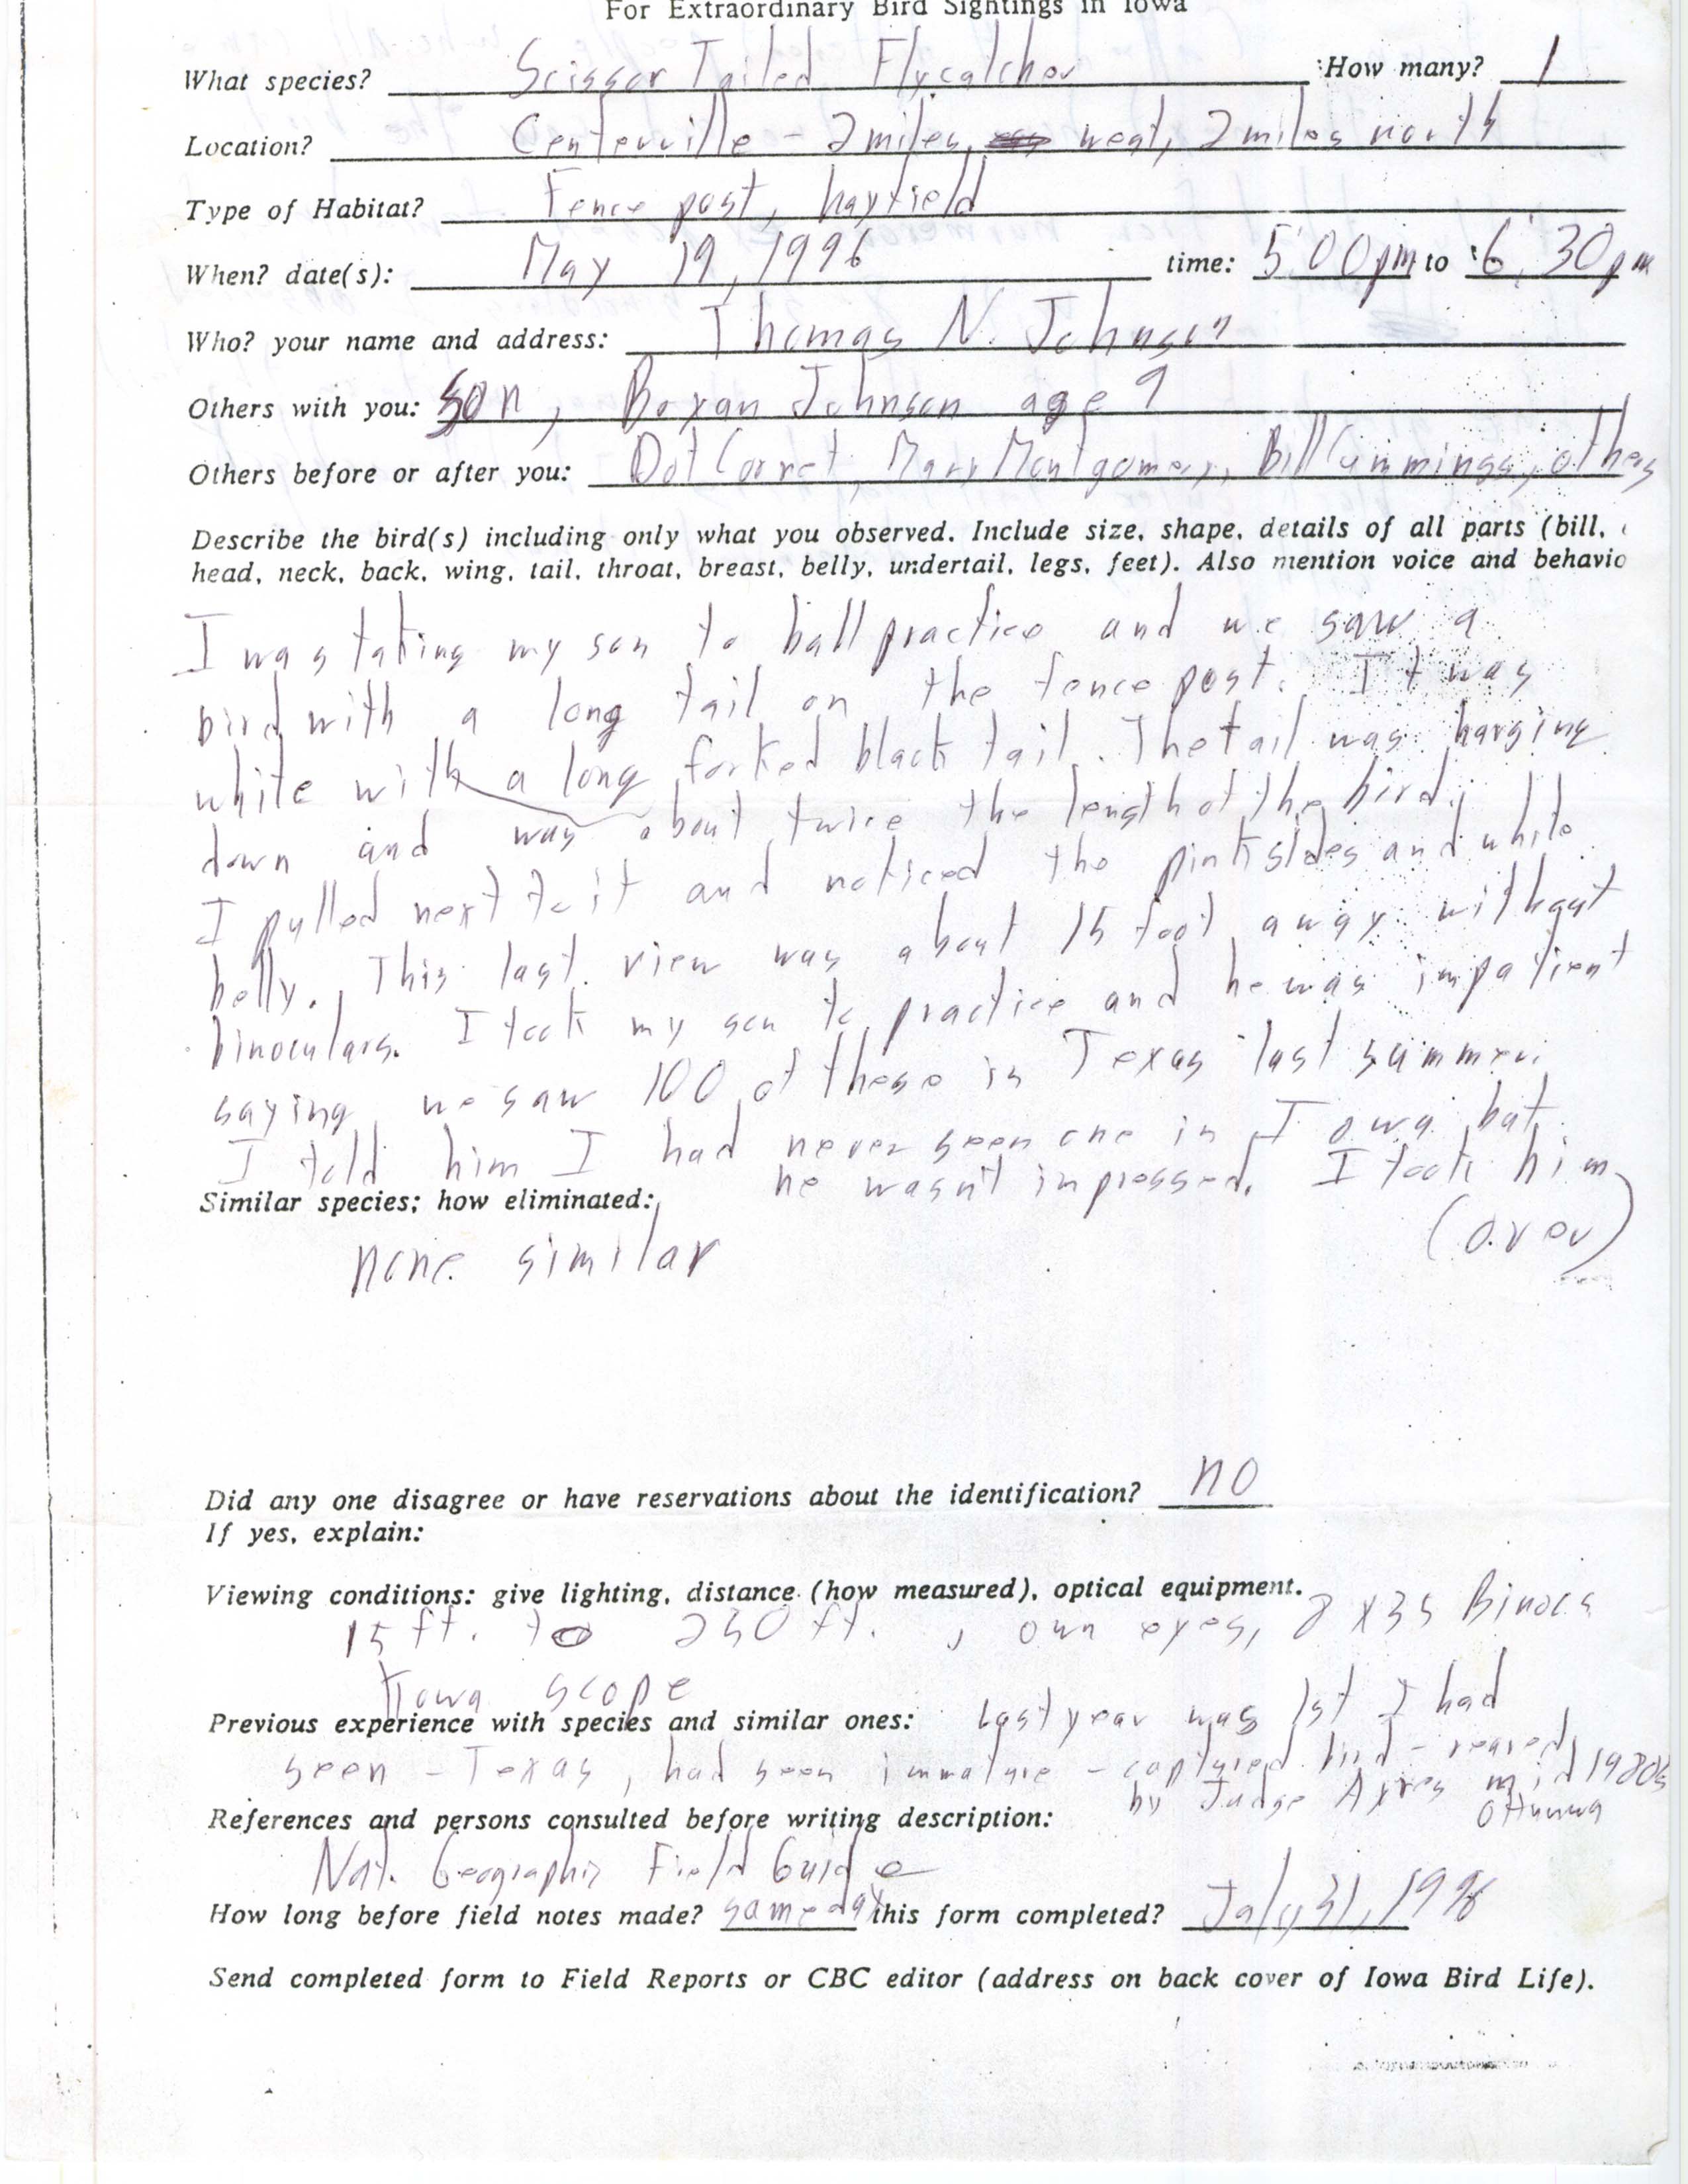 Rare bird documentation form for Scissor-tailed Flycatcher west and north of Centerville, 1996